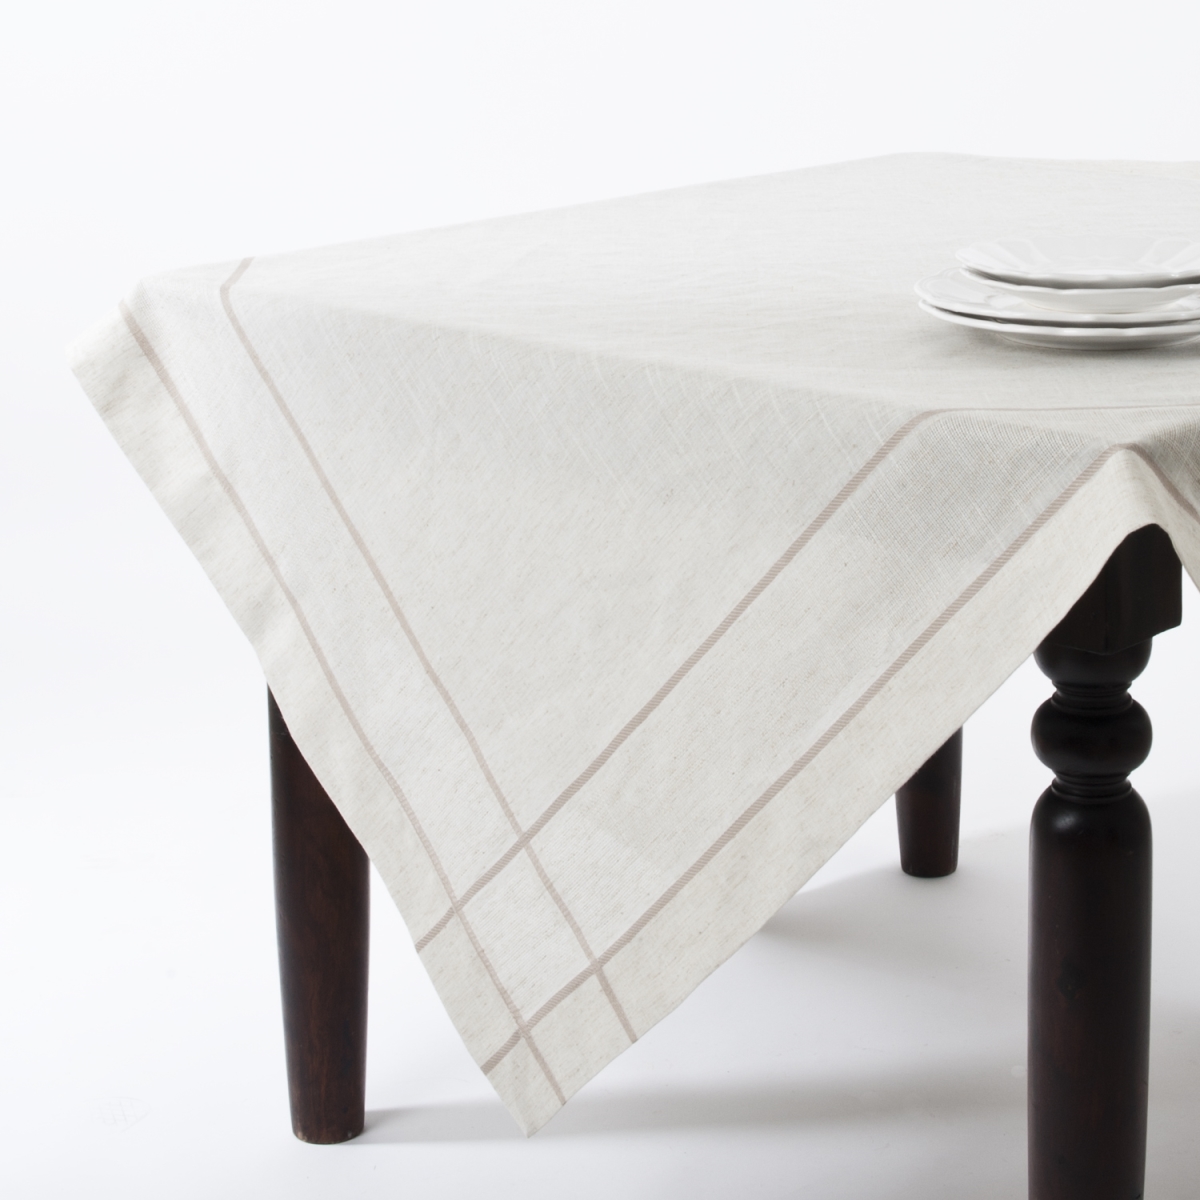 UPC 789323283542 product image for SARO 13176.N72S 72 in. Square Drawn Work Design Tablecloth - Natural | upcitemdb.com